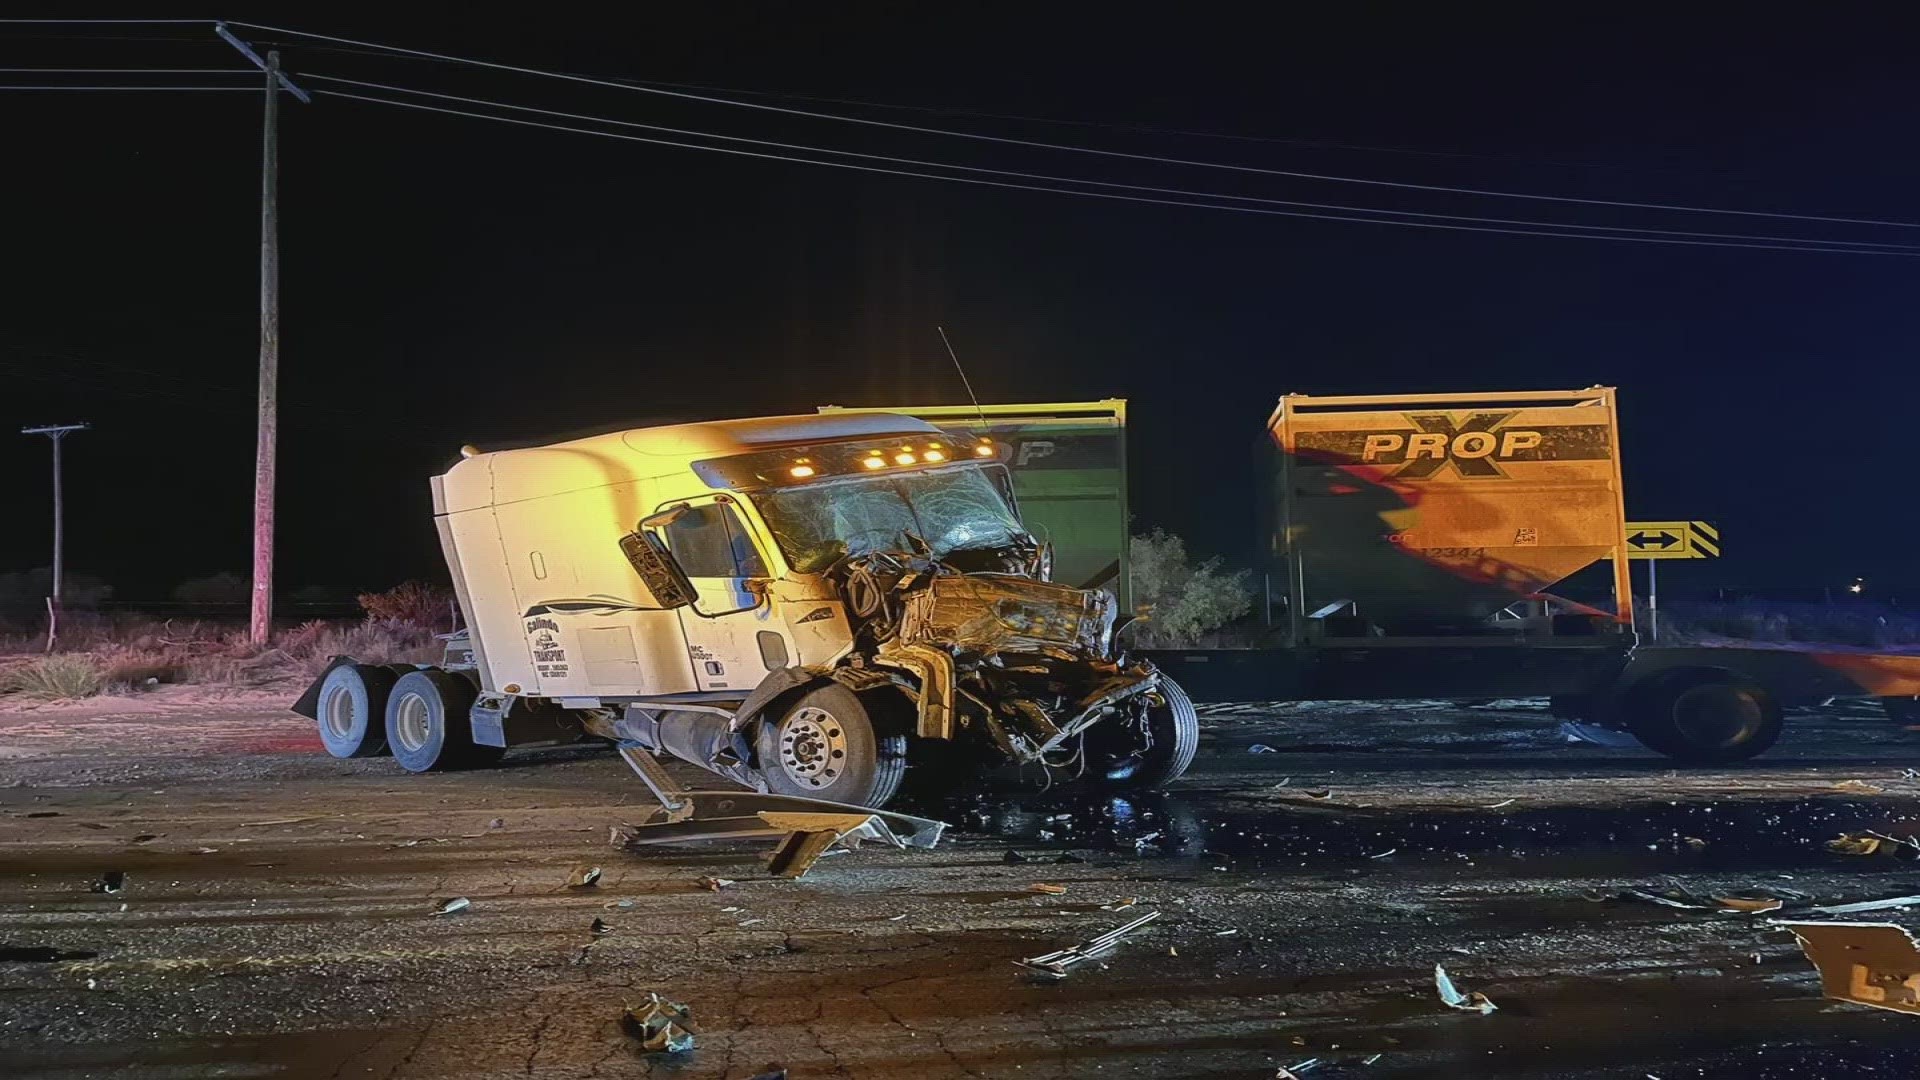 According to the Winkler County Sheriff's Office, two commercial motor vehicles crashed causing injuries and Highway 115 to close.